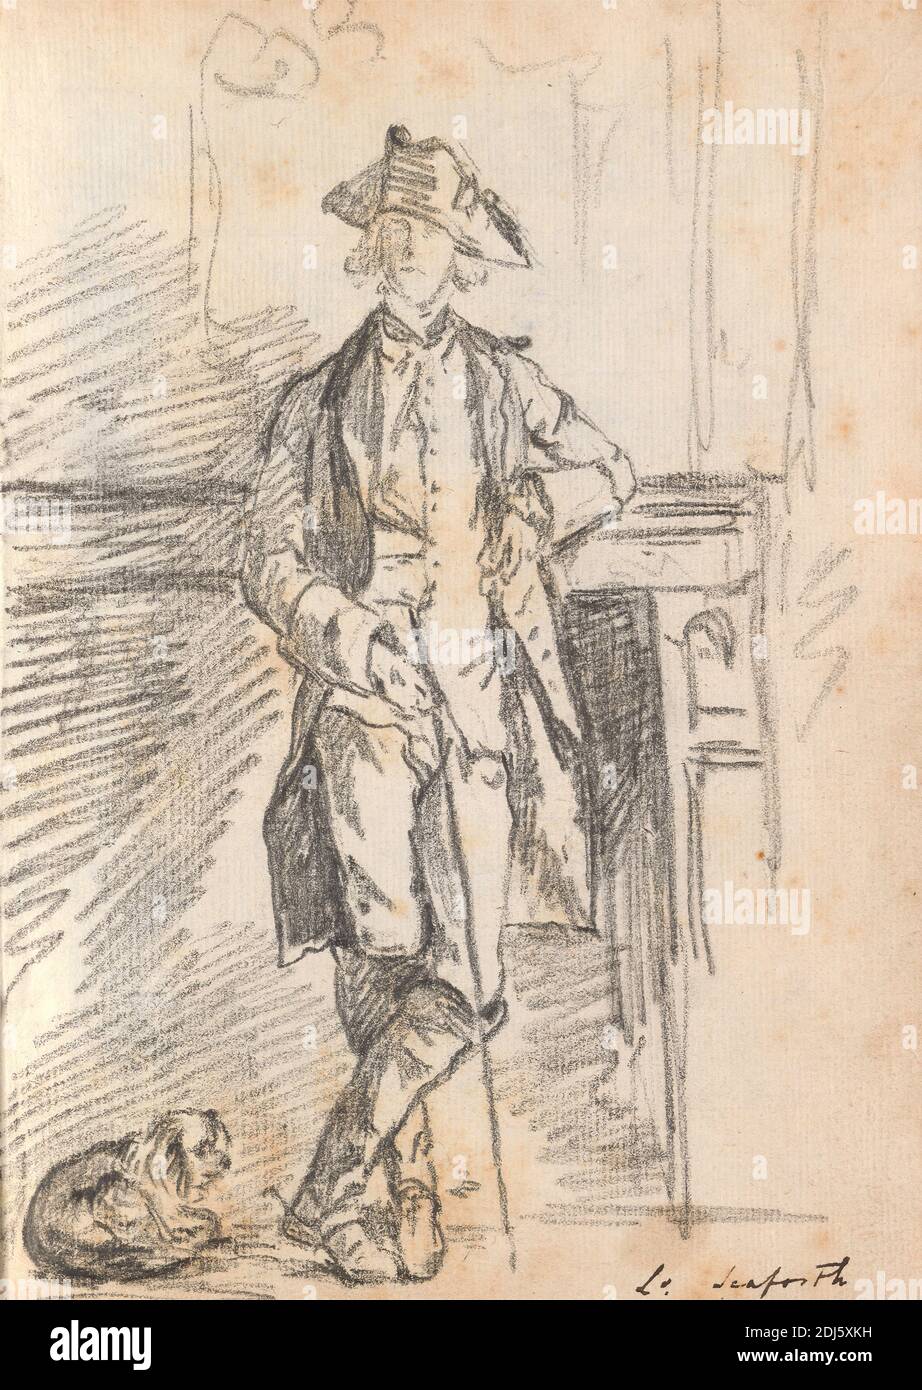 Lord Seaforth in a Tricorn Hat Leaning against a Mantelpiece, a Dog at His Feet, Thomas Patch, 1725–1782, British, 1760s, Black chalk on medium, slightly textured, cream laid paper bound in carta fiorentina, Sheet: 8 3/4 x 6 1/2 inches (22.2 x 16.5 cm) and Spine: 8 7/8 inches (22.5 cm), Grand Tour, portrait Stock Photo